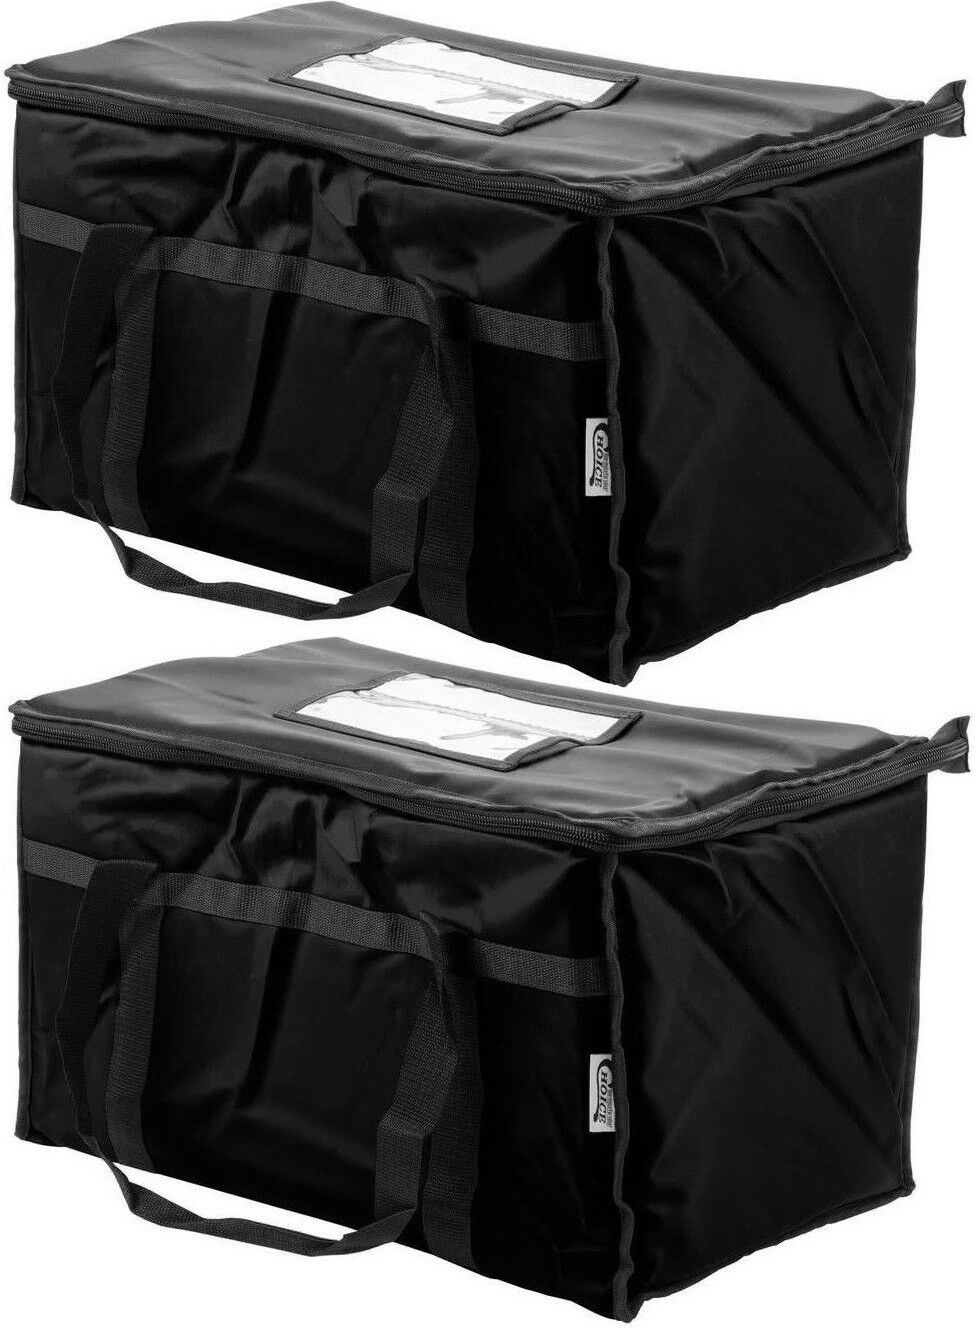 Two Insulated Black Catering Delivery Food Full Pan Carrier Hot Cold Cooler Bag